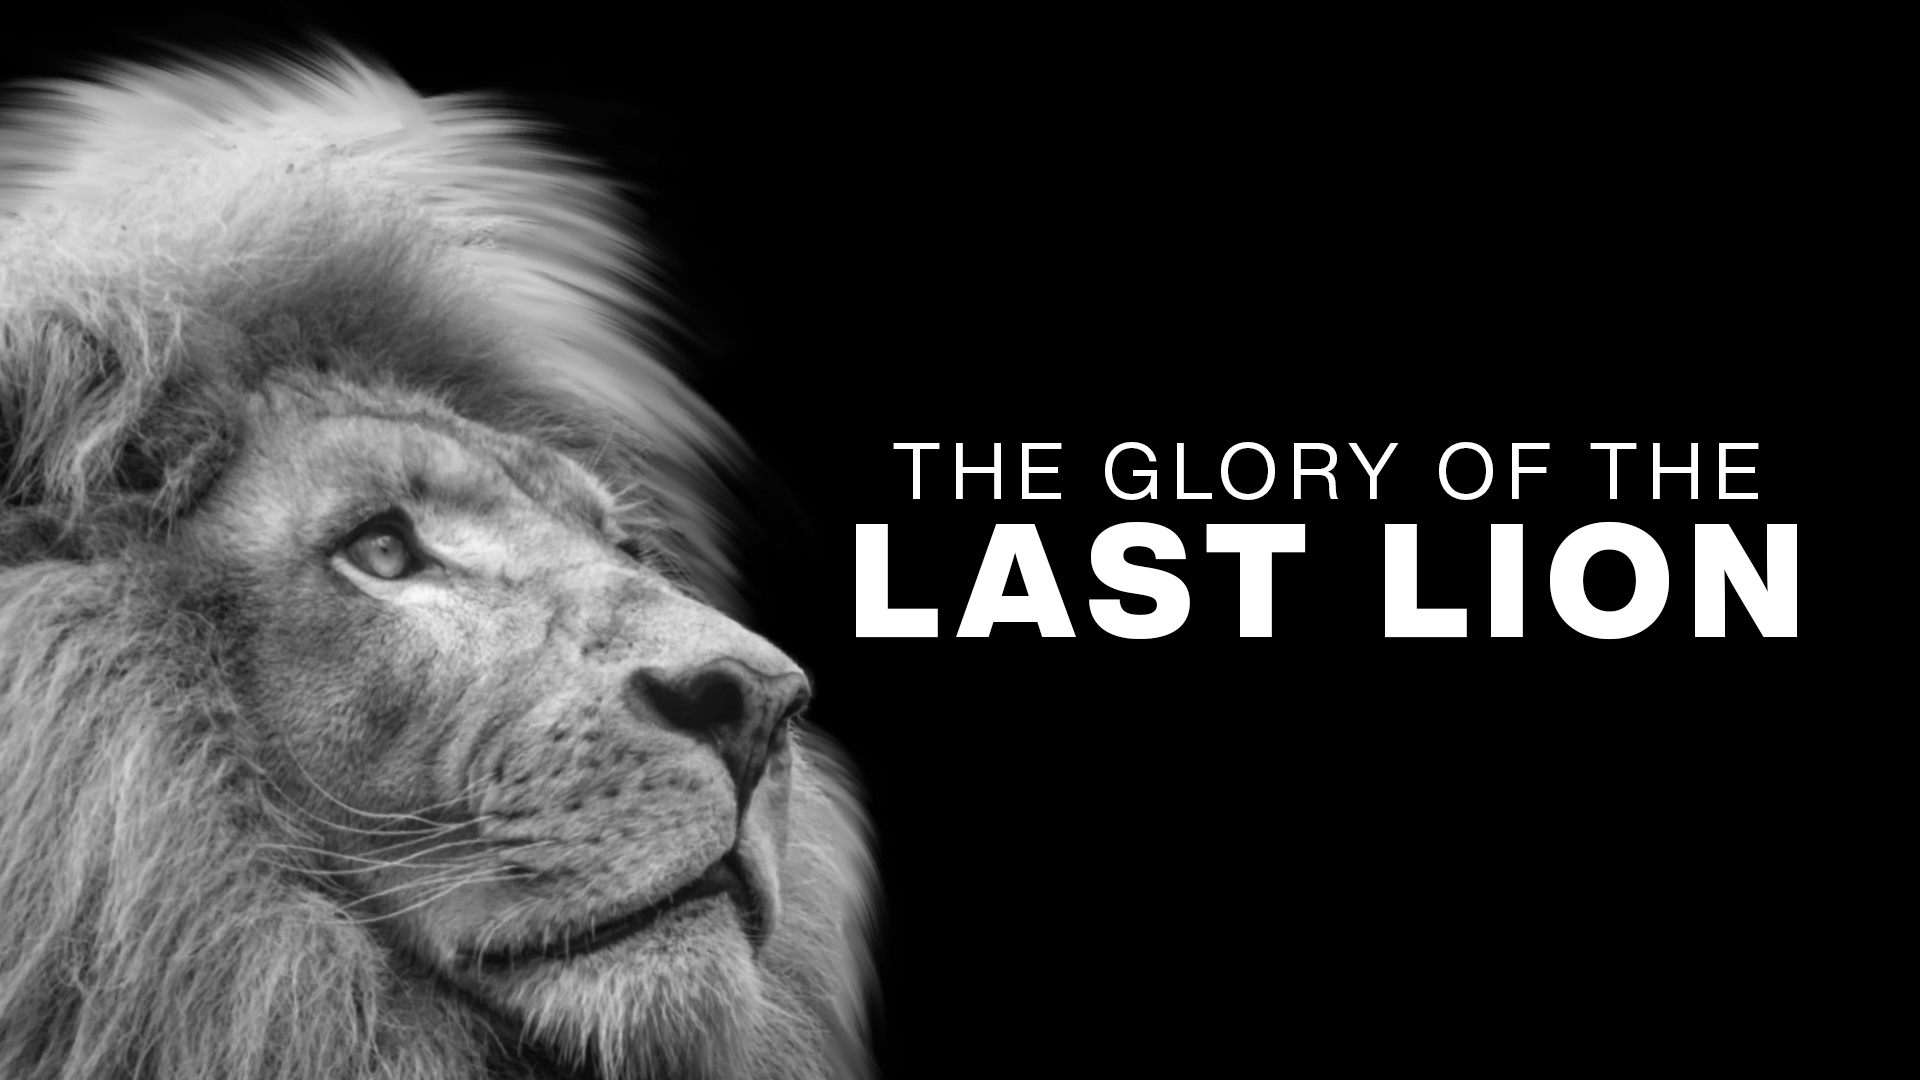 The Glory of the Last Lion